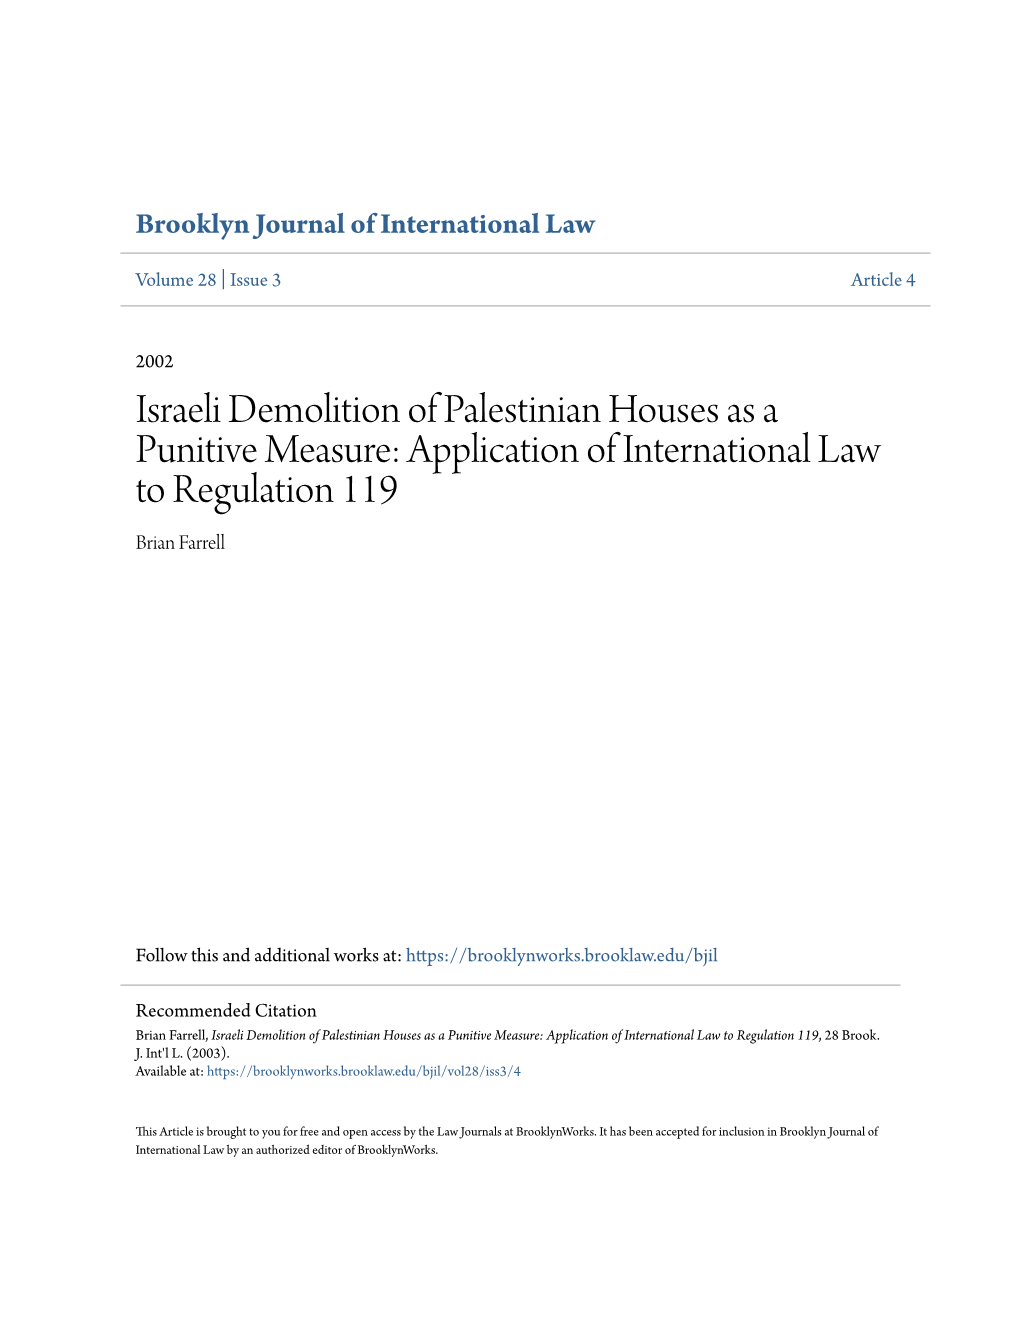 Israeli Demolition of Palestinian Houses As a Punitive Measure: Application of International Law to Regulation 119 Brian Farrell